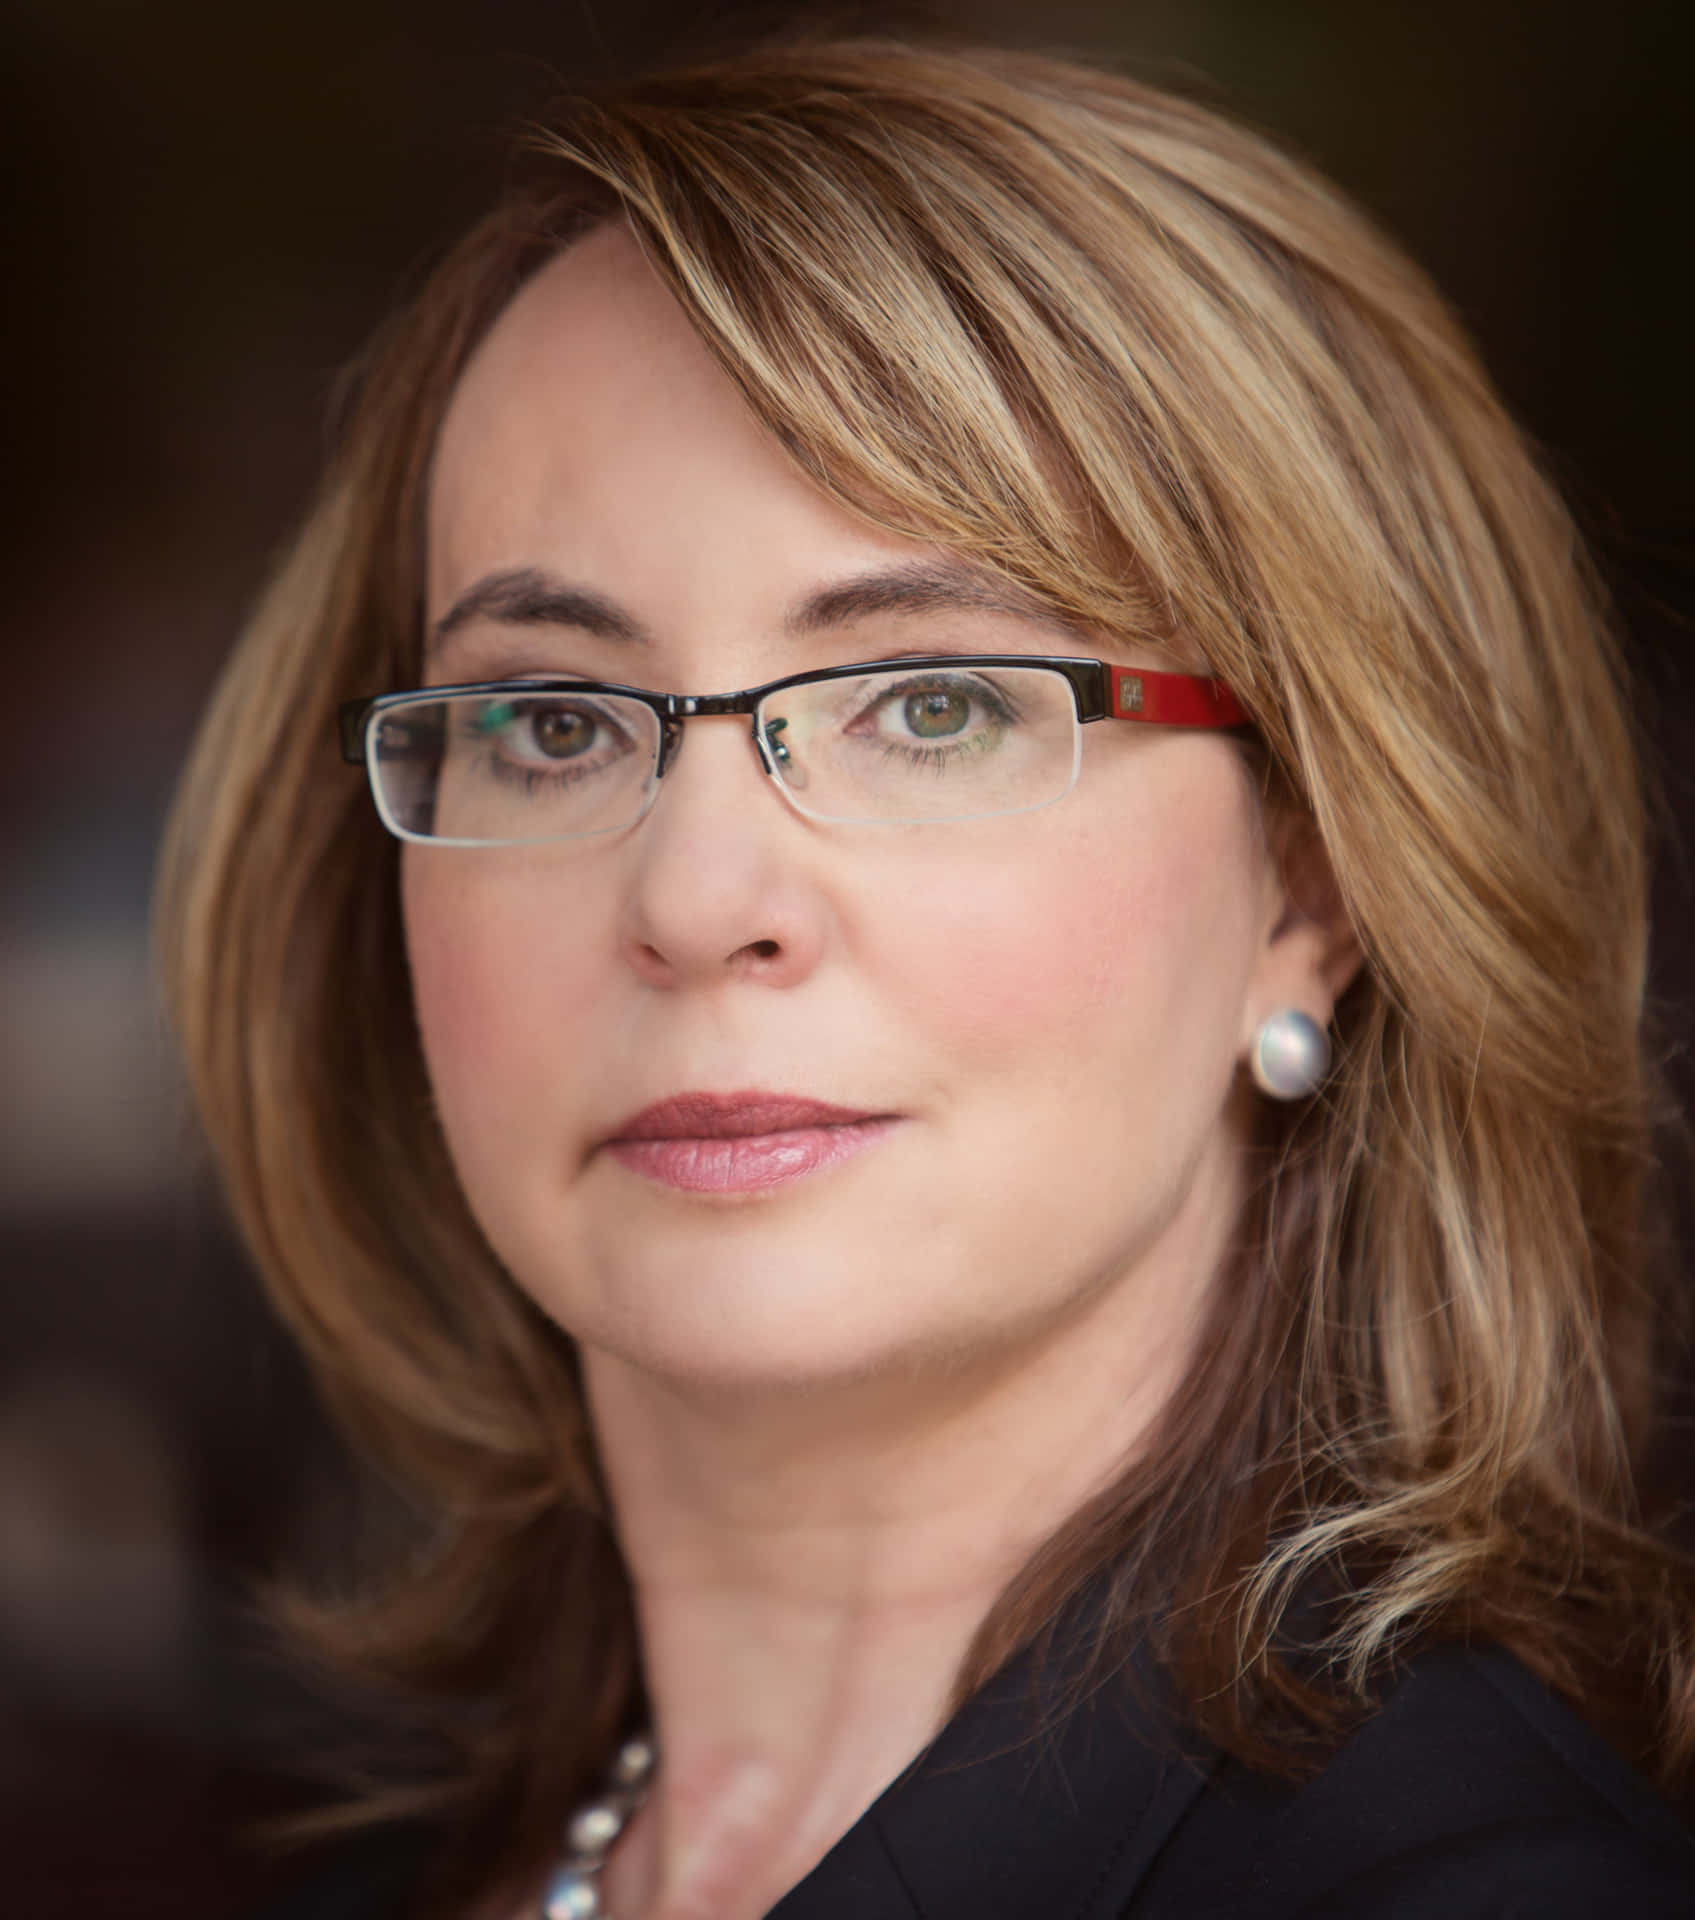 Caption: Gabrielle Giffords Addressing The Audience In A Political Event Wallpaper